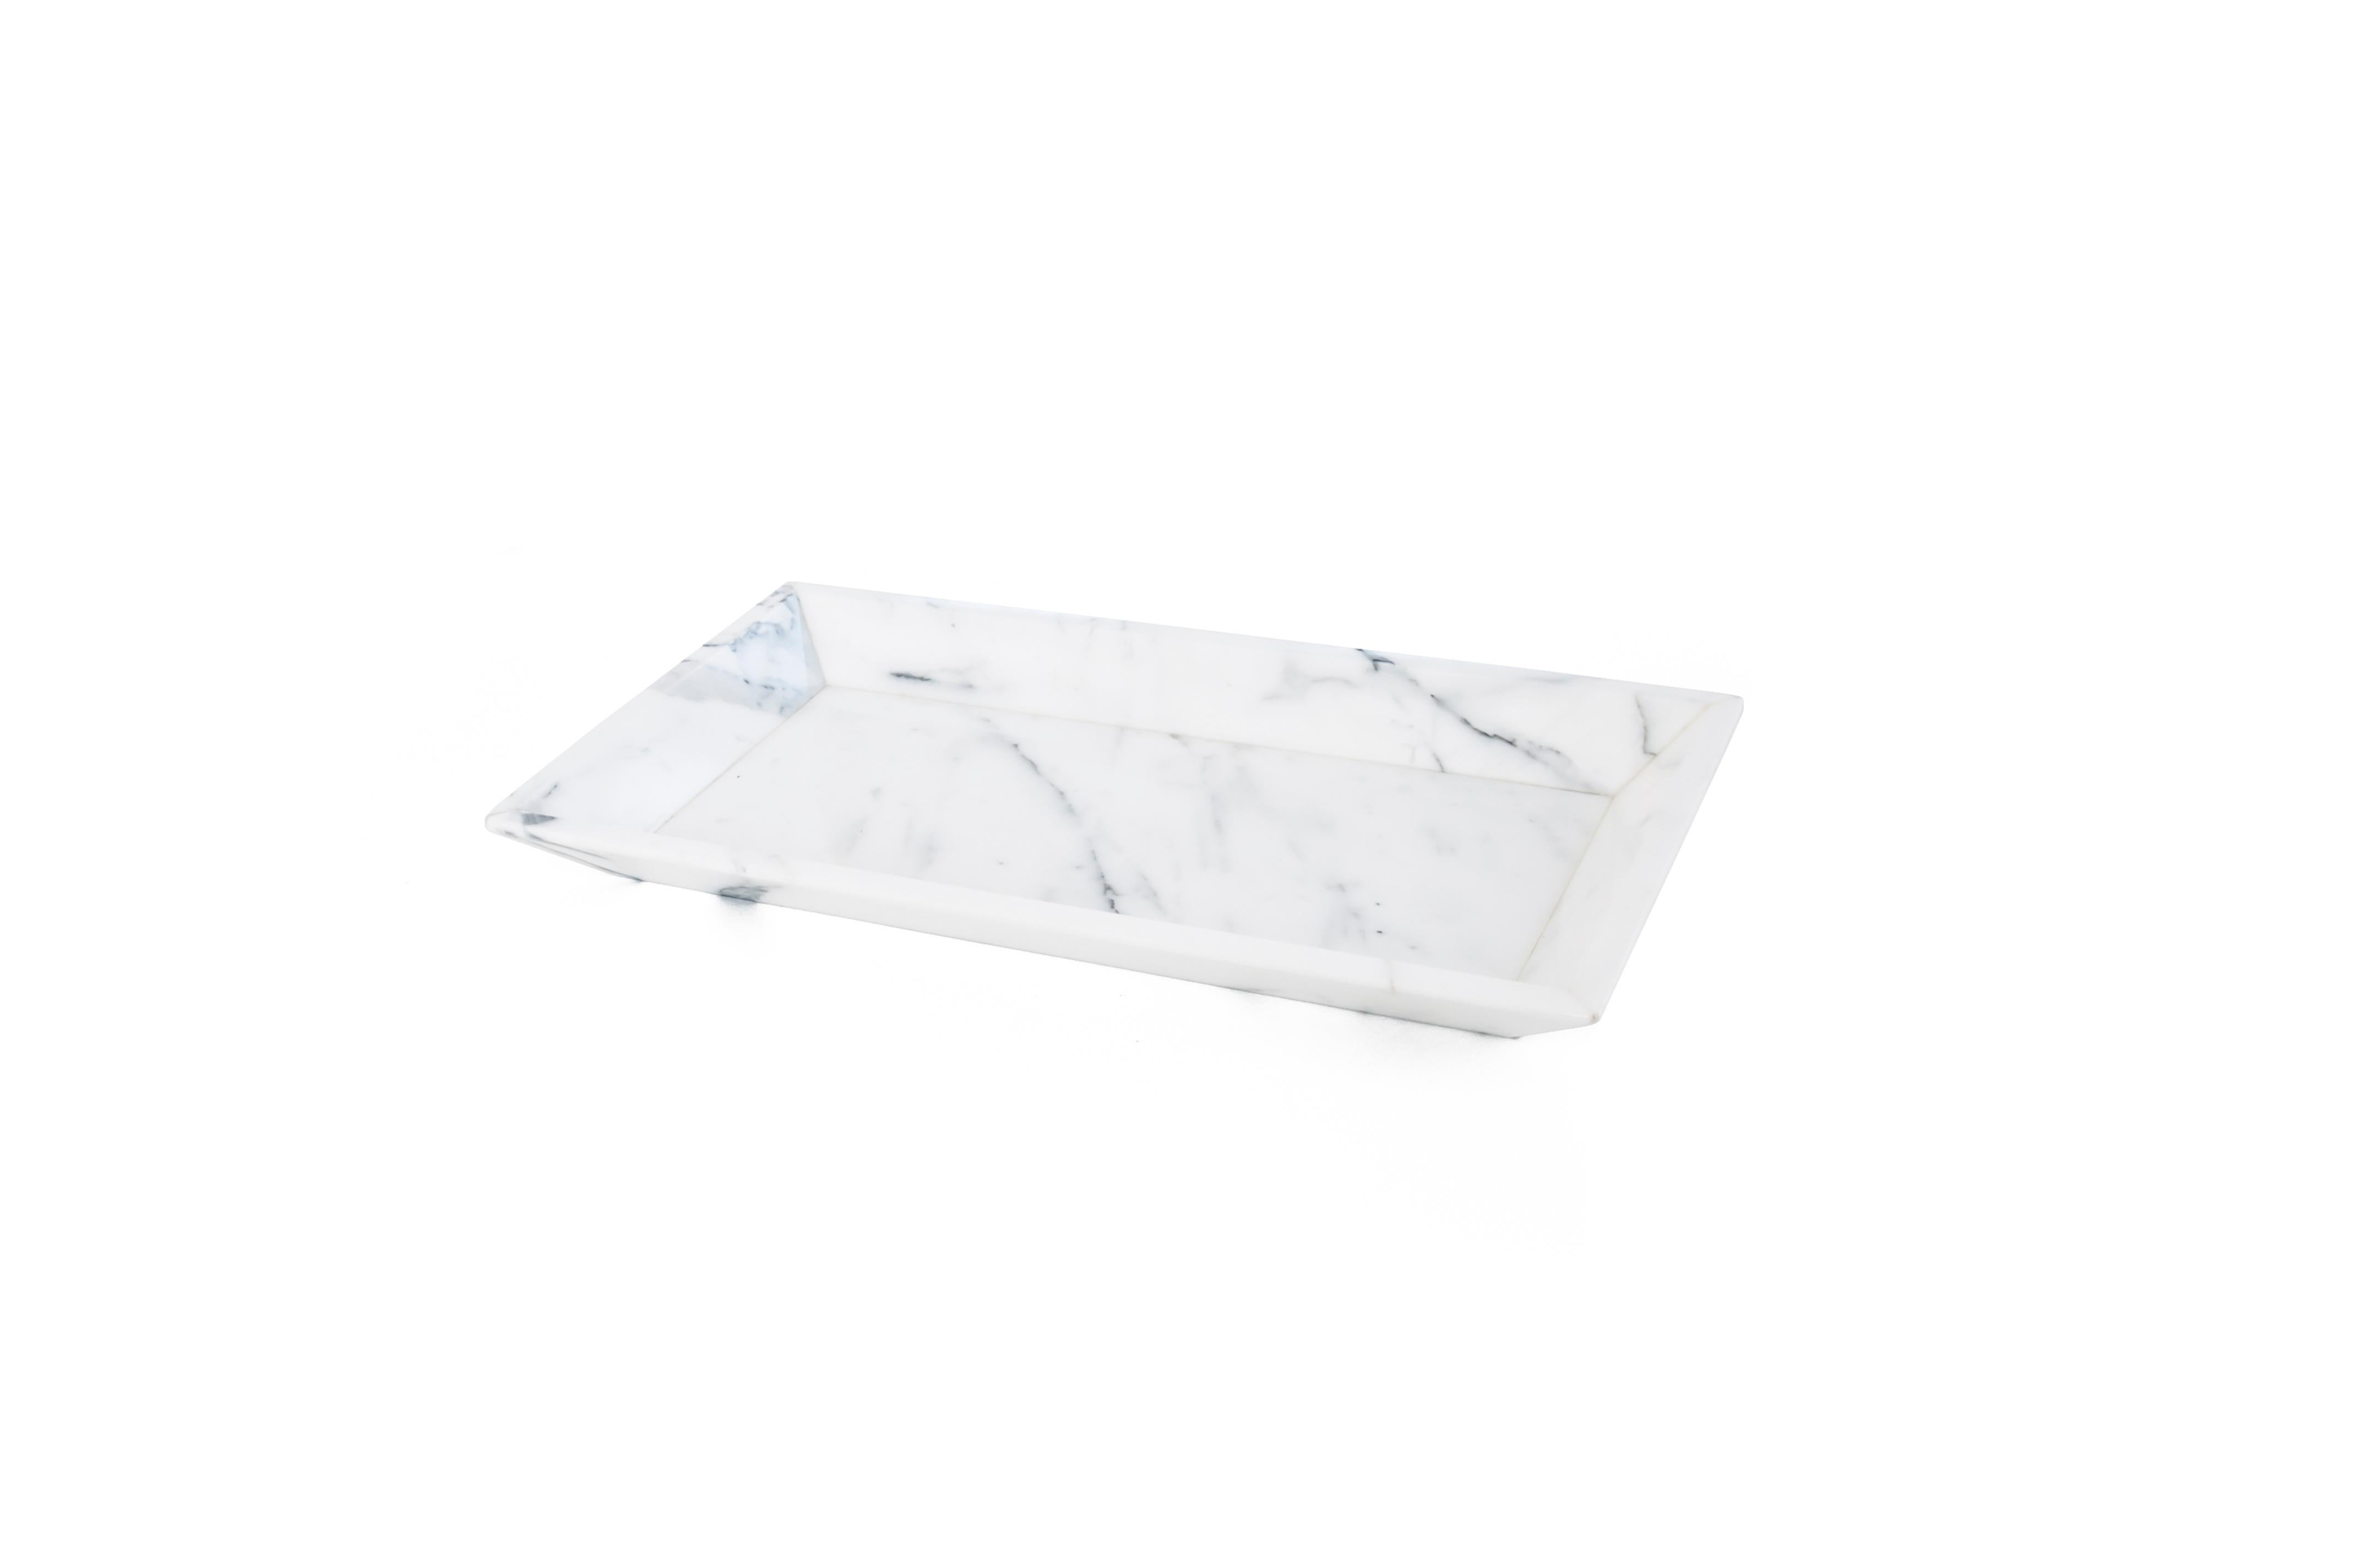 White Carrara marble tray or plate. Ideal for many uses and ambient: living room, studio, kitchen. Each piece is in a way unique (every marble block is different in veins and shades) and handmade by Italian artisans specialized over generations in